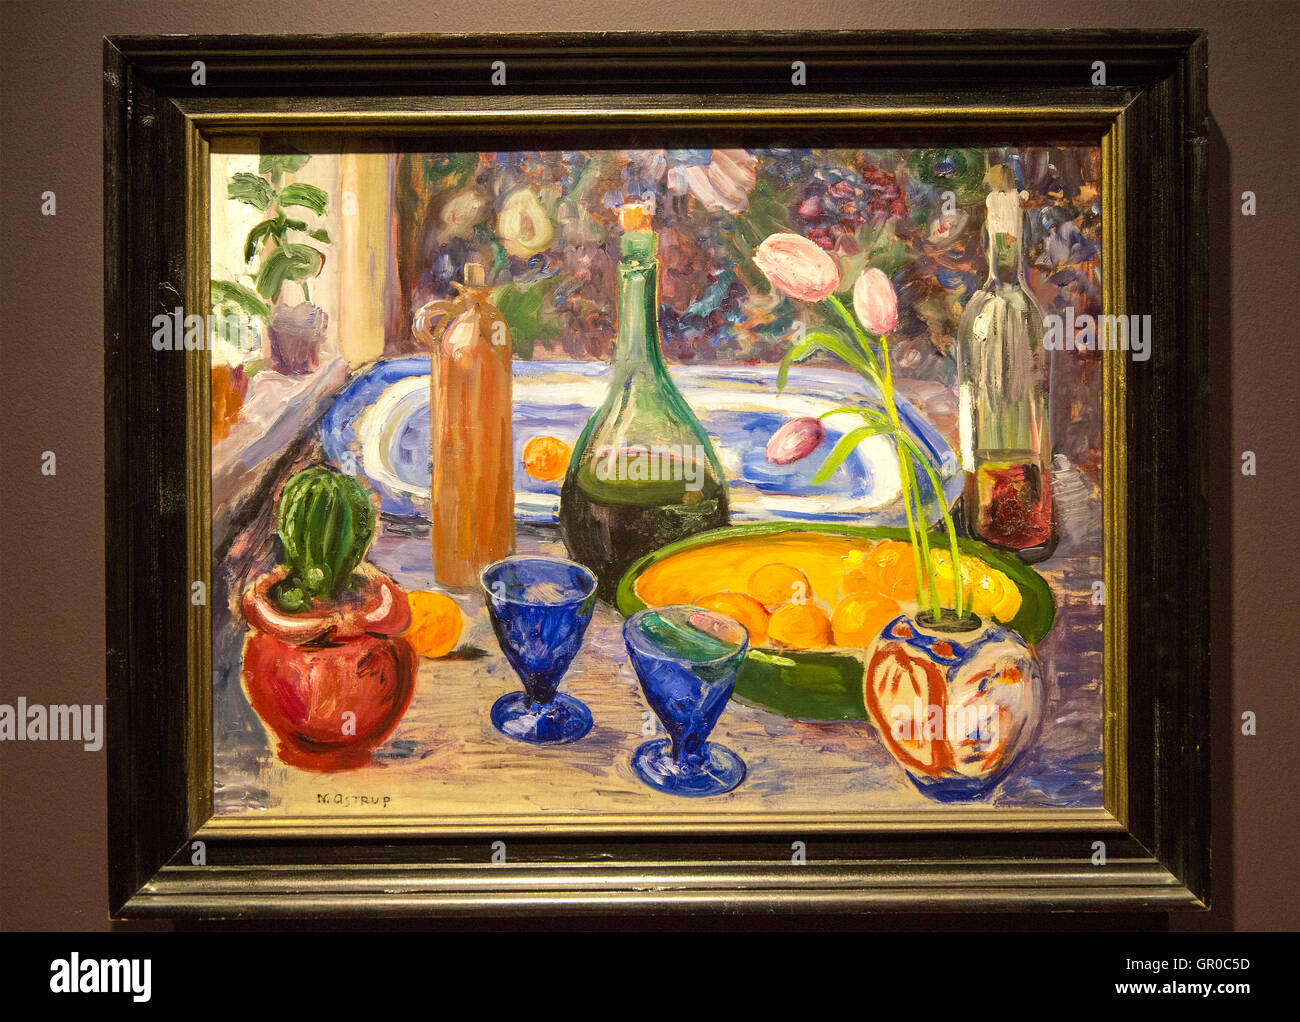 'Still Life' undated oil painting sketch on canvas by Nikolai Astrup 1880-1928, Kode 4 art gallery Bergen, Norway Stock Photo